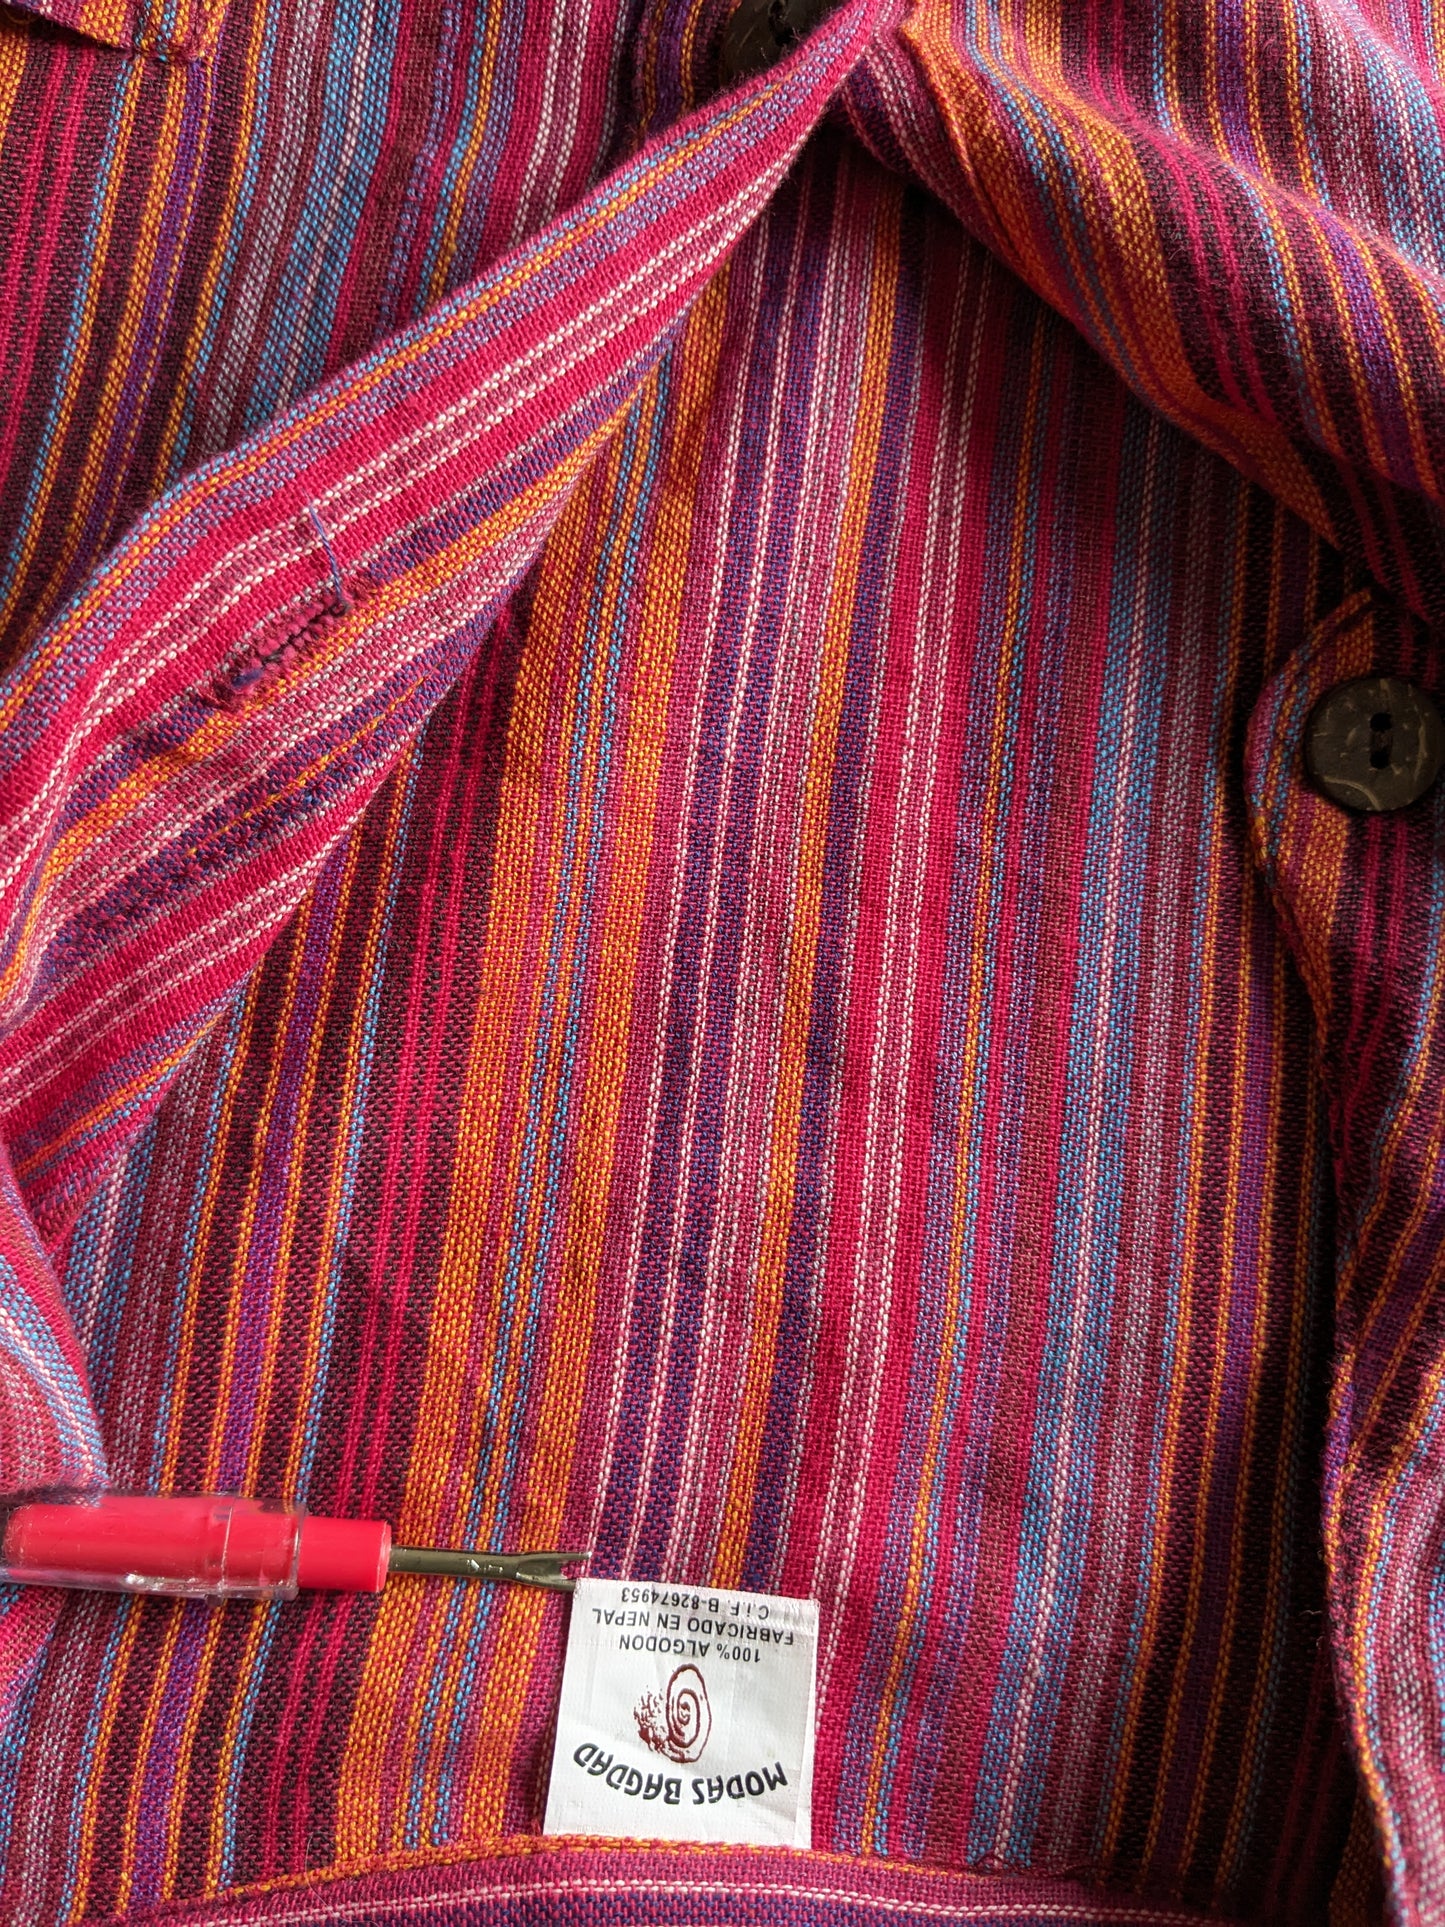 Vintage Modas Baghdad Polotrui / Shirt with Mao / Standing / Farmer Collar. Red / colored striped. Size L.